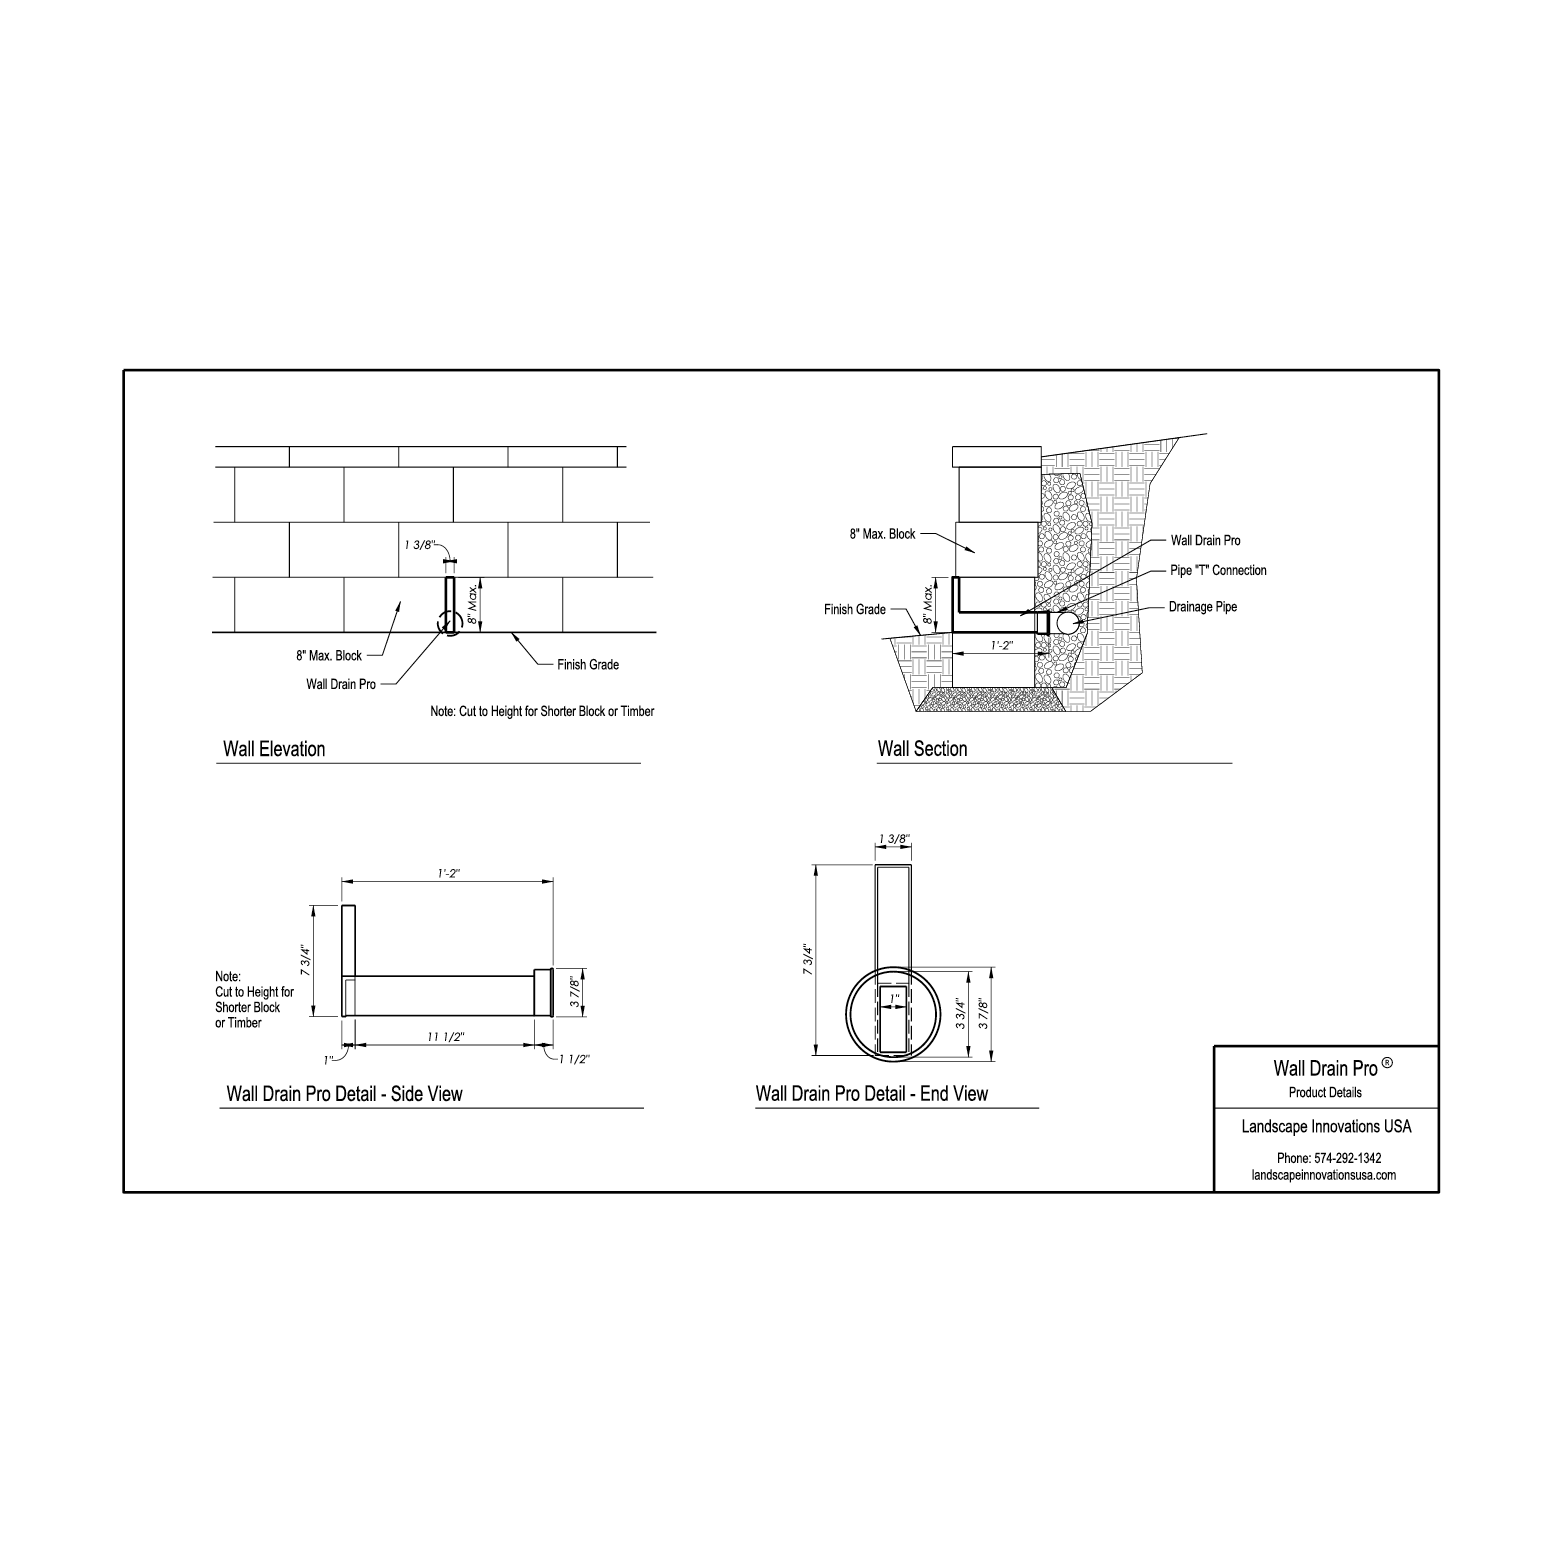 Wall drain pro product details sheet